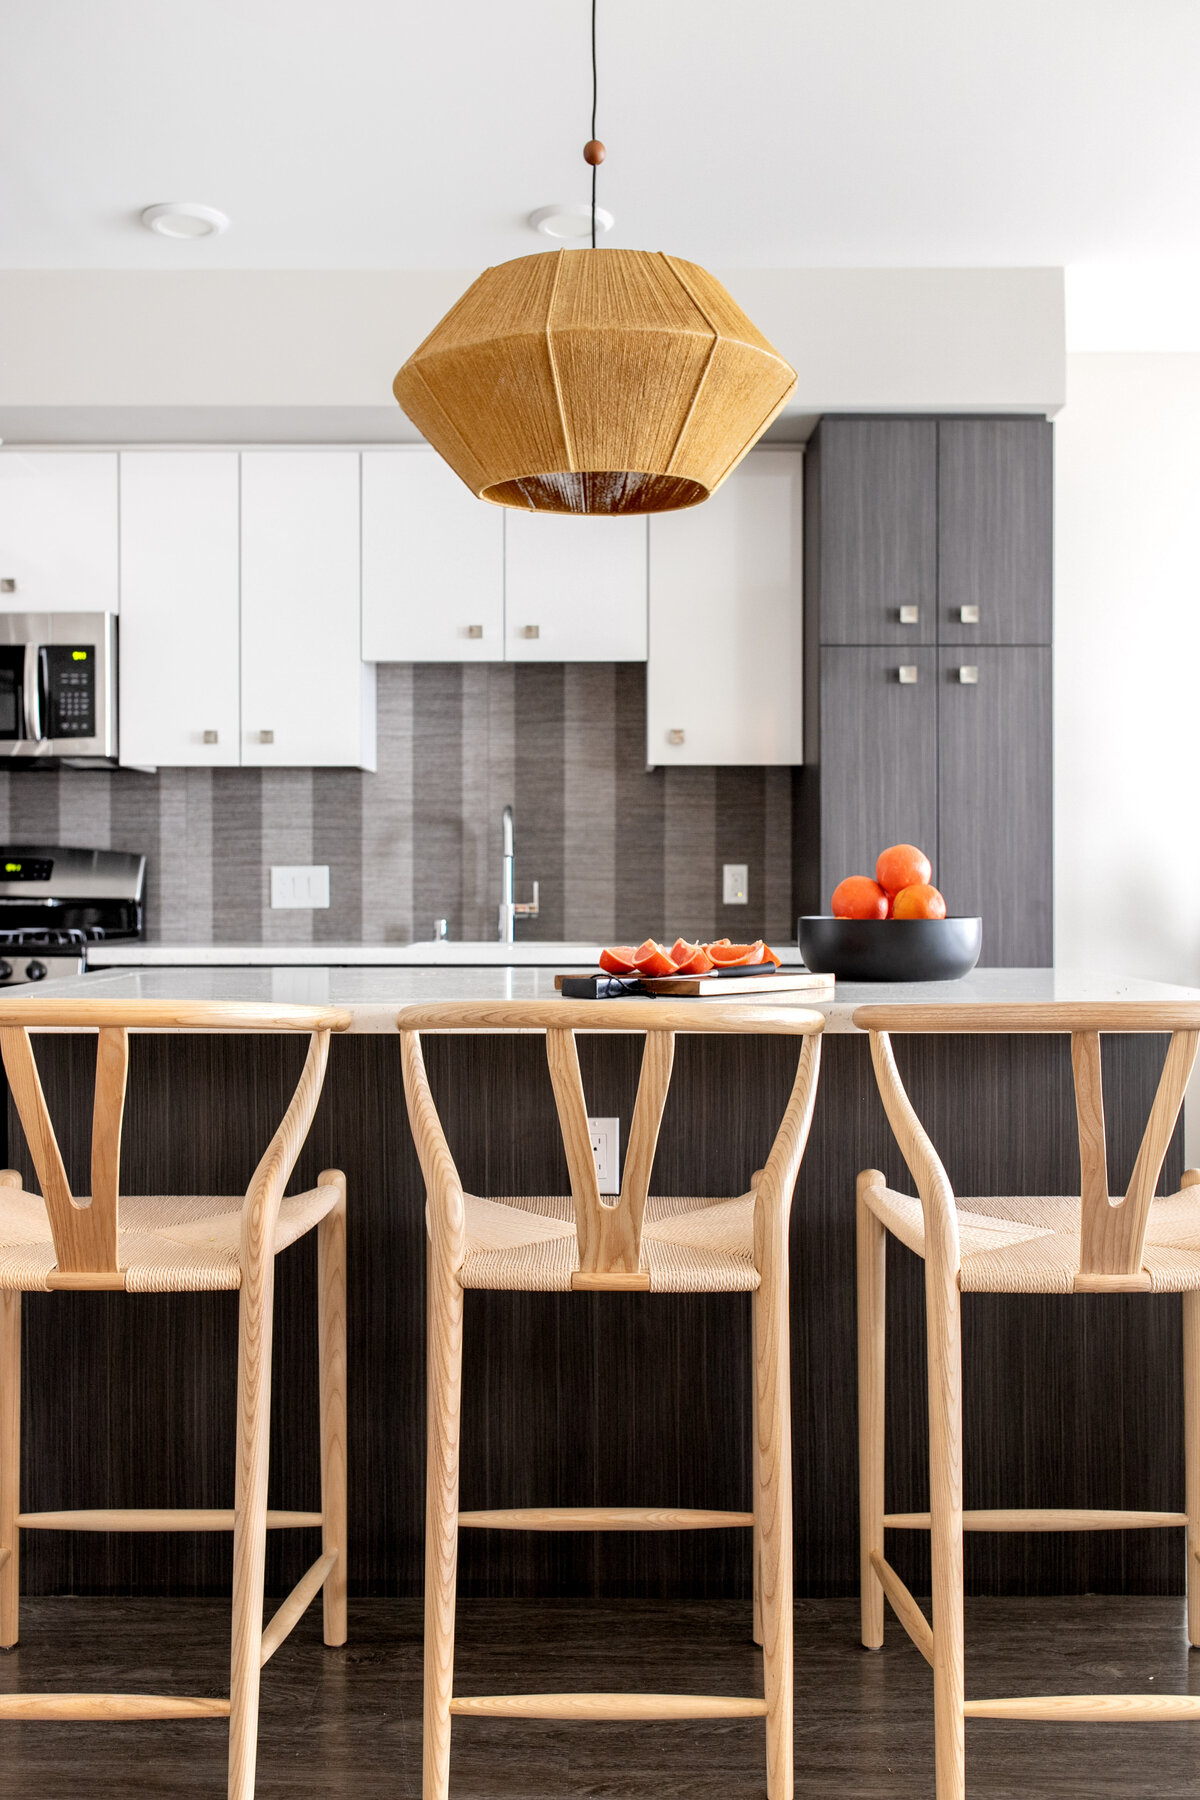 Wishbone natural wood barstools in front of kitchen island with jute pendant hanging above